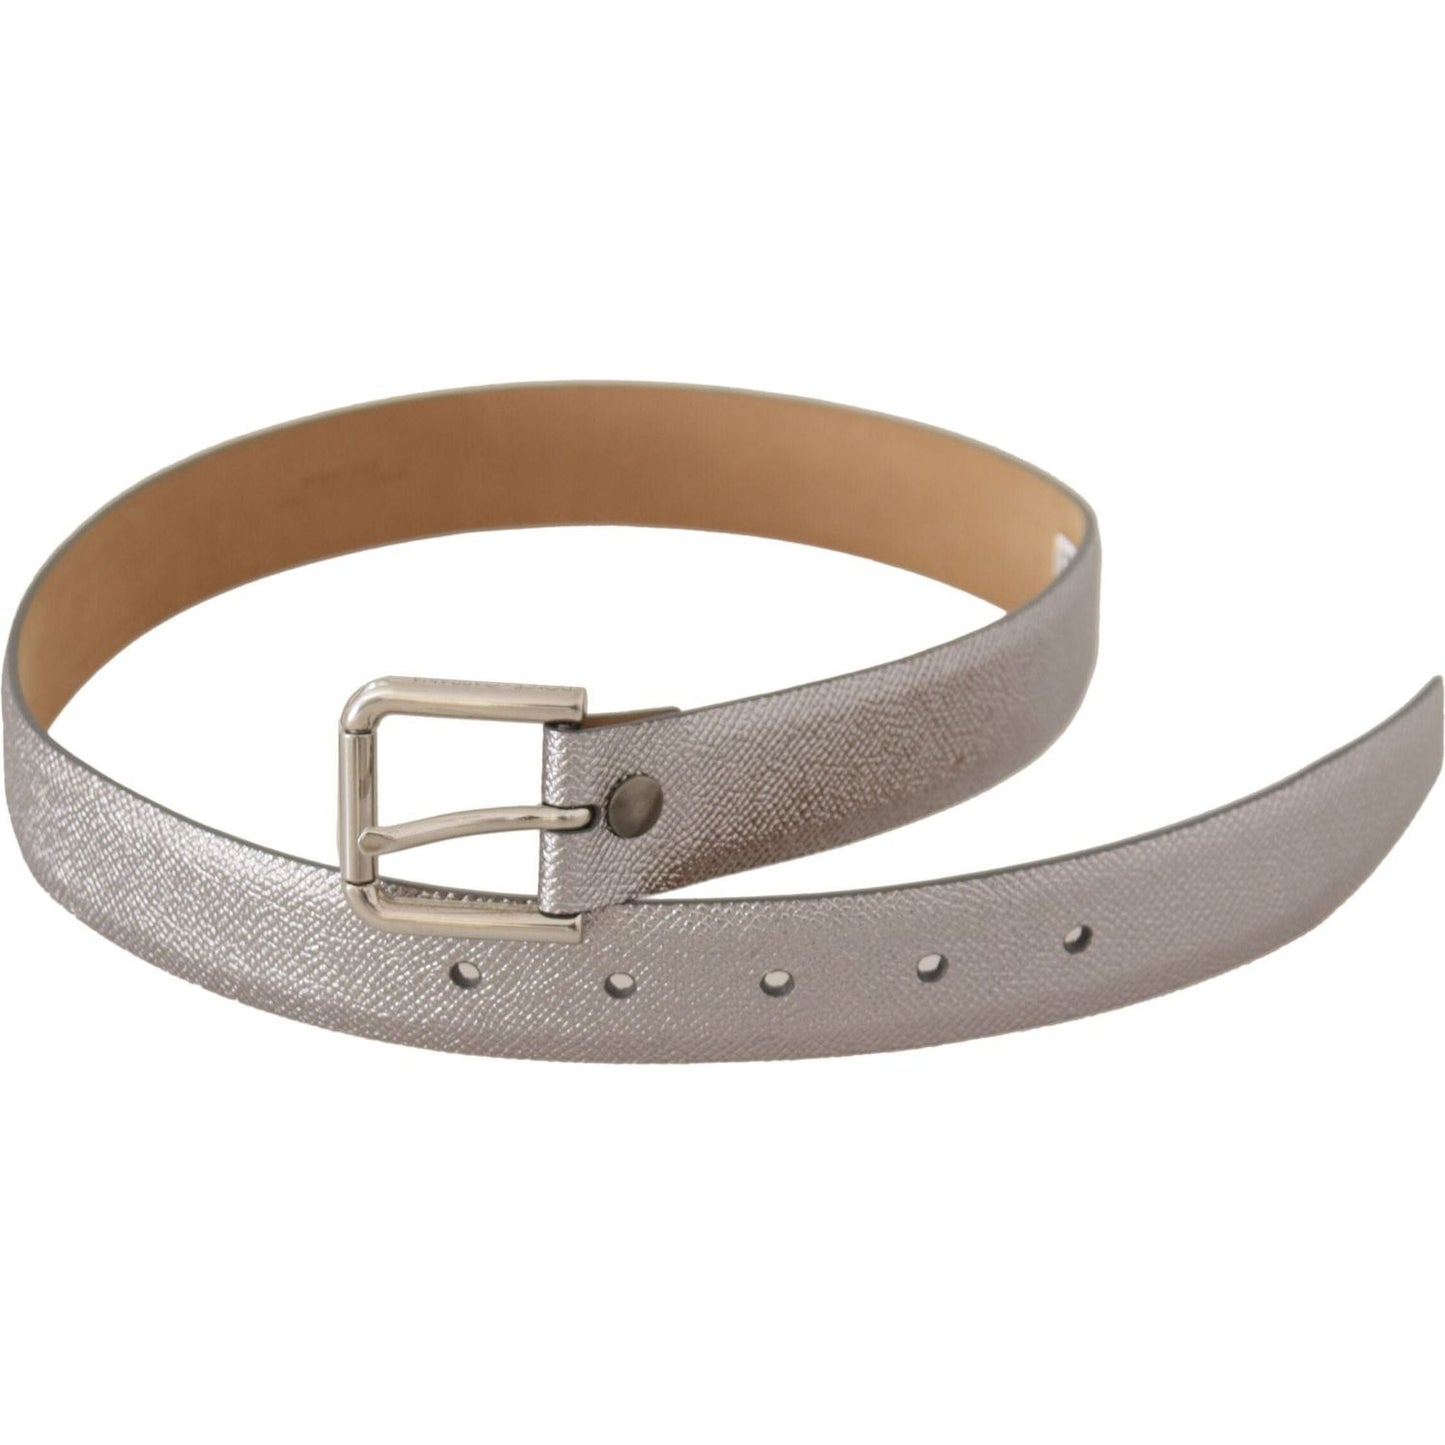 Dolce & Gabbana Elegant Silver Leather Belt with Engraved Buckle metallic-silver-leather-metal-waist-buckle-belt IMG_0779-2-scaled-9f0e9cbb-6d1.jpg